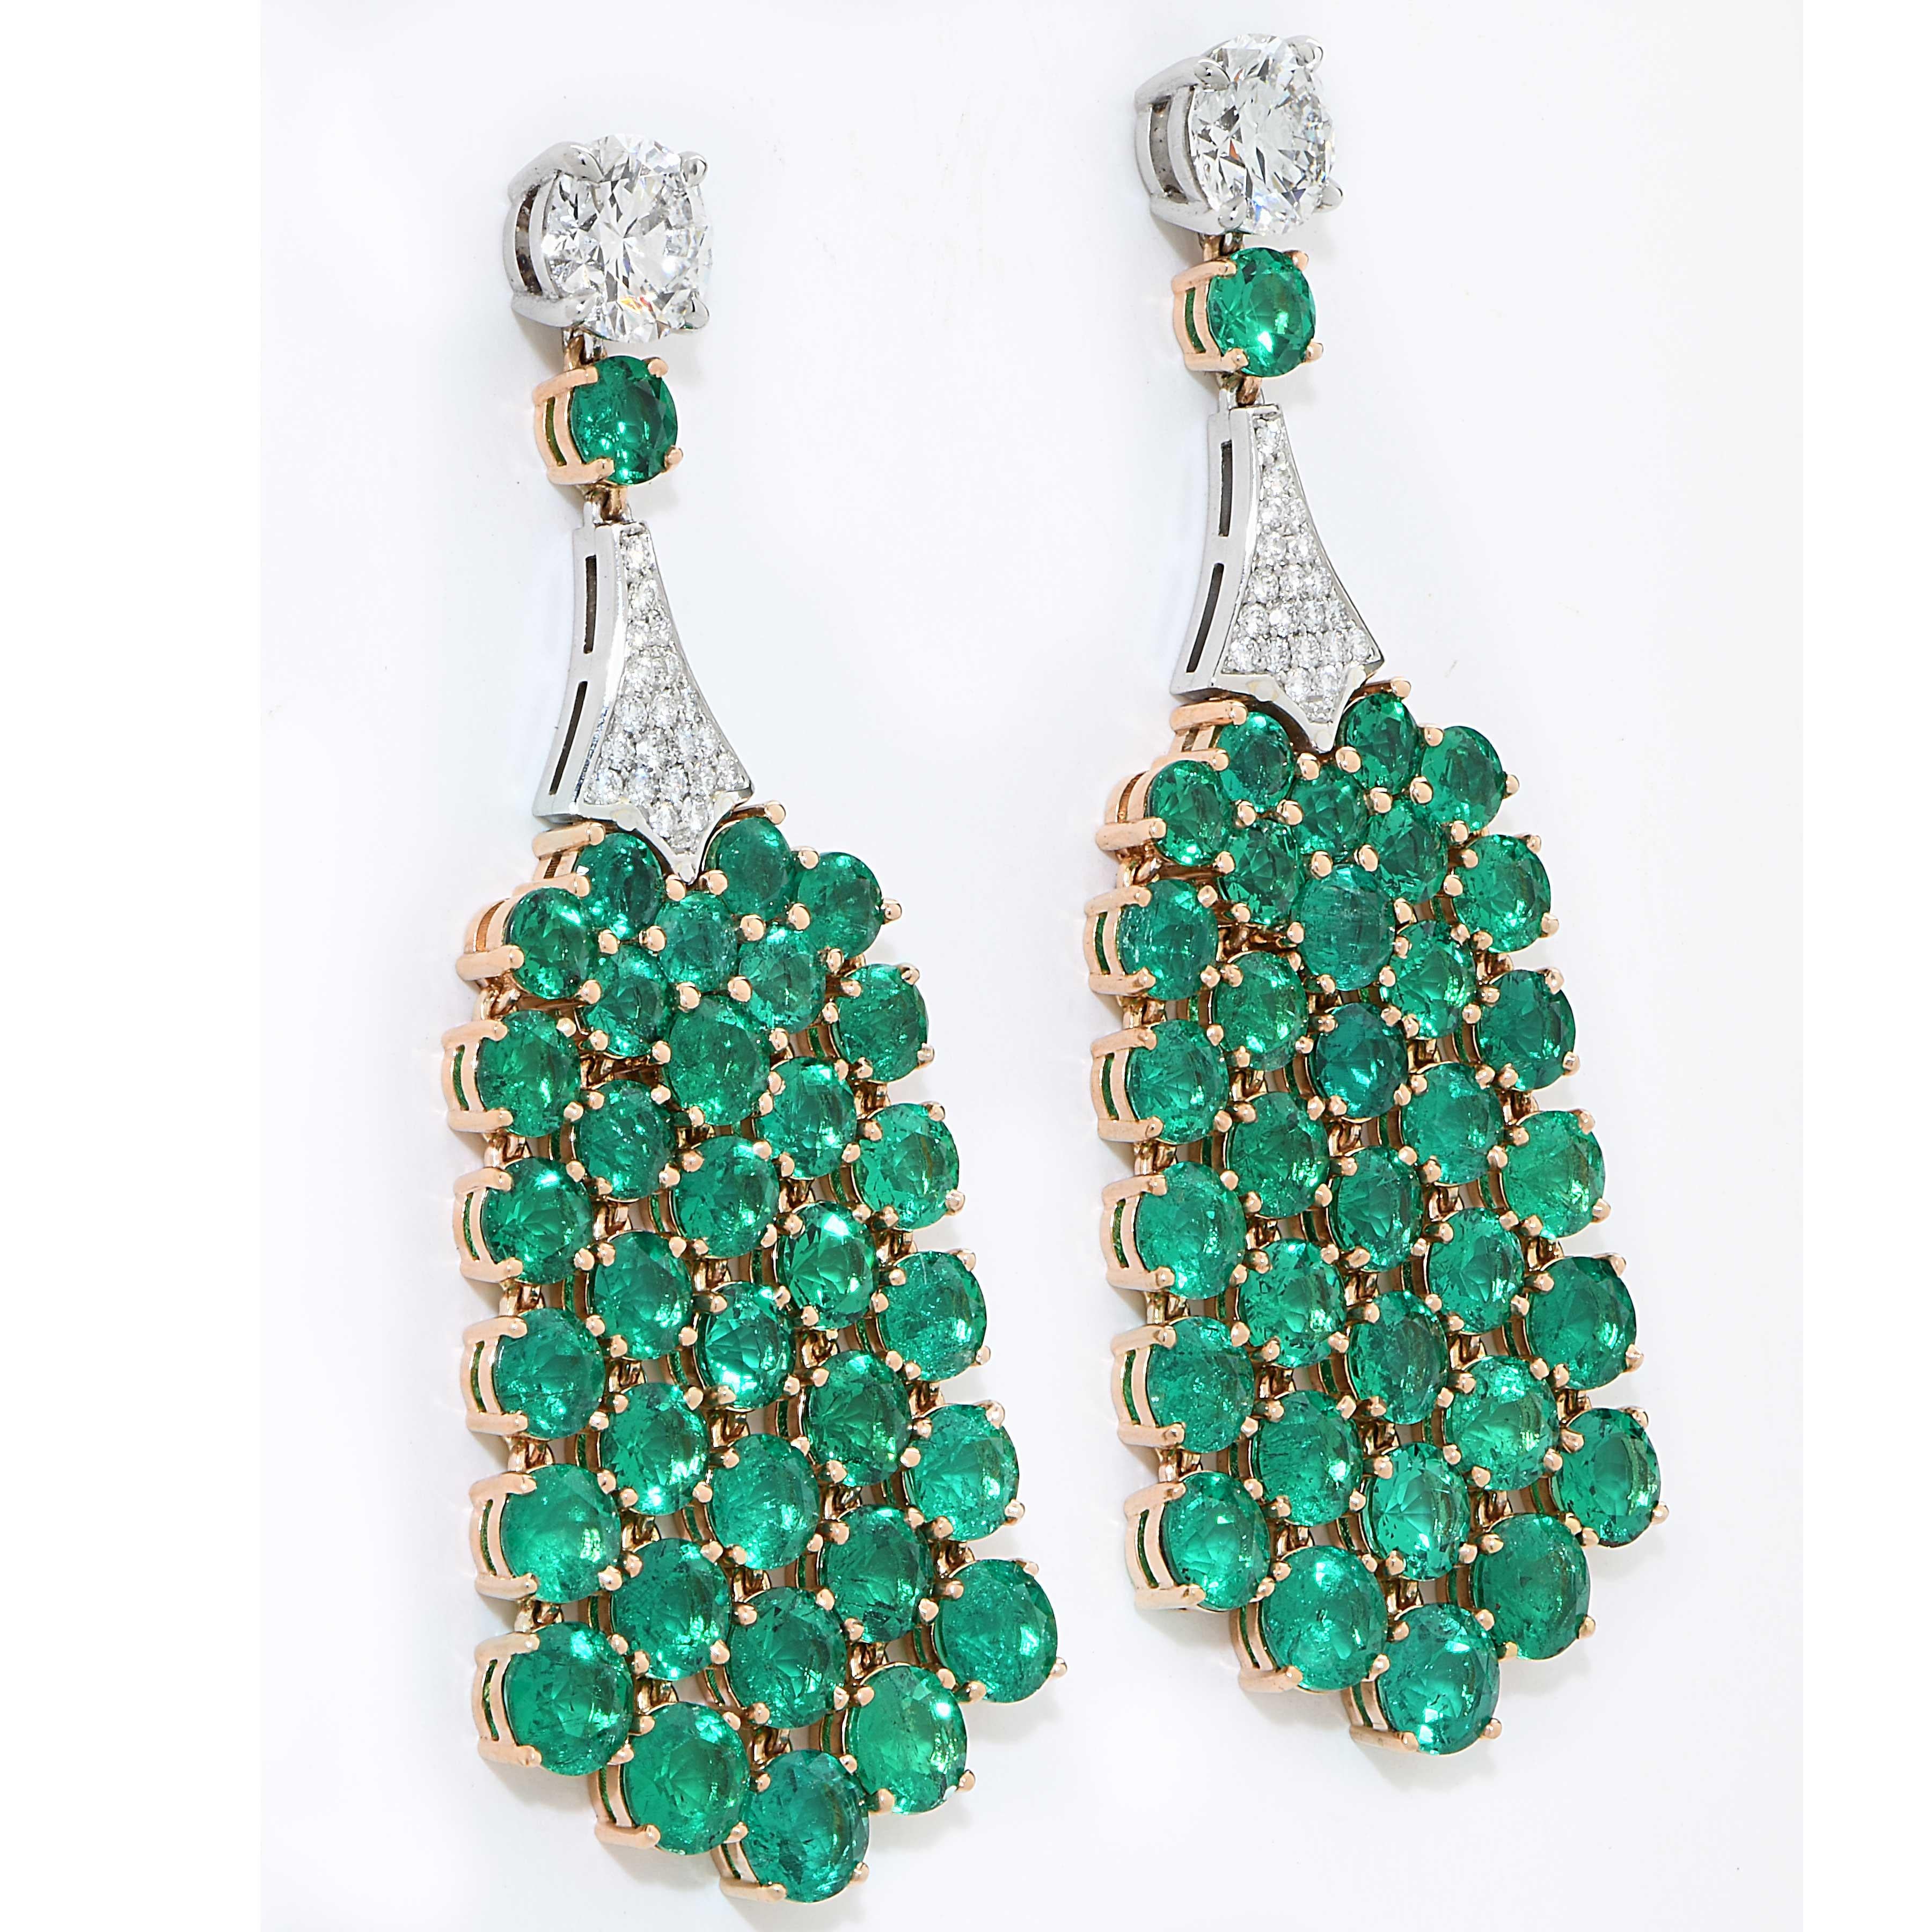 Fine Colombian Emerald and Diamond Earrings featuring 68 round brilliant cut fine Colombian emeralds with a total weight of 15.5 Carats and 40 round brilliant cut diamonds with an estimated total weight of .30 Carats and 2 GIA graded diamonds, 1.02